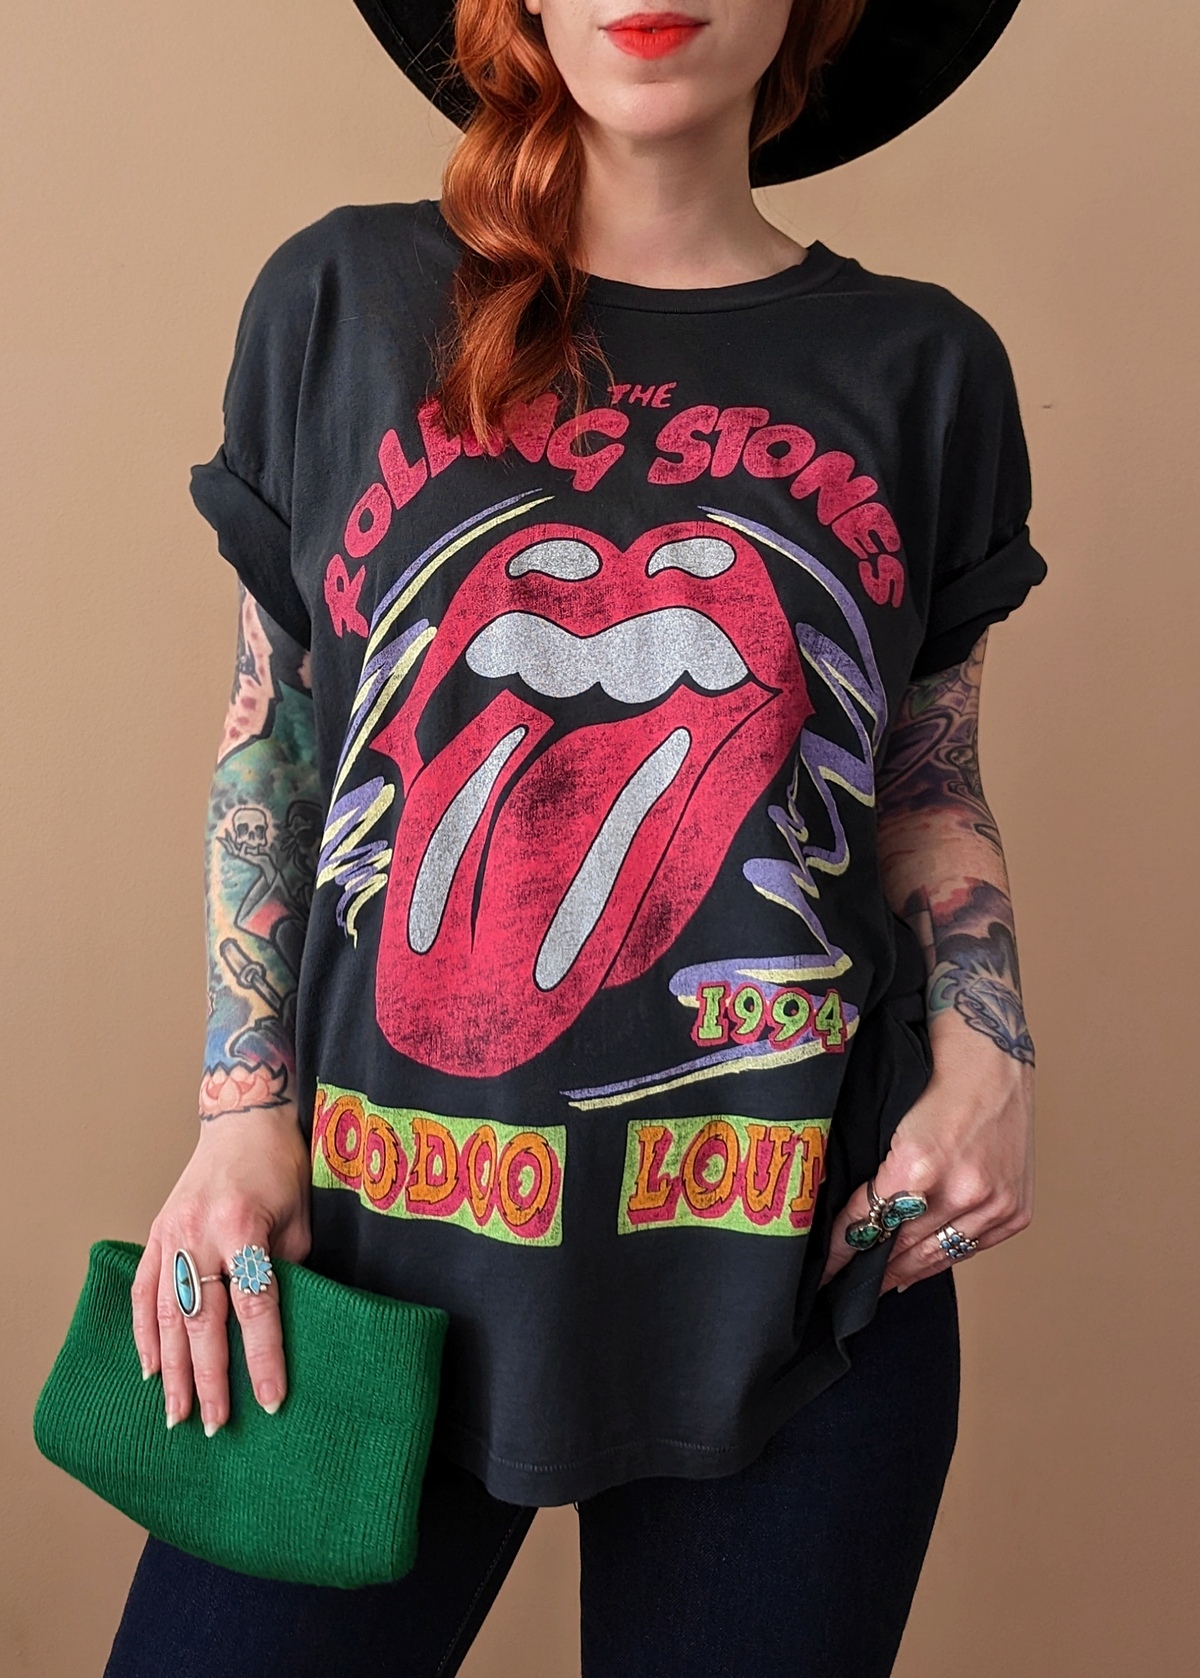 Daydreamer LA Rolling Stones Voodoo Lounge 1994 Officially licensed oversized tee. Made in California